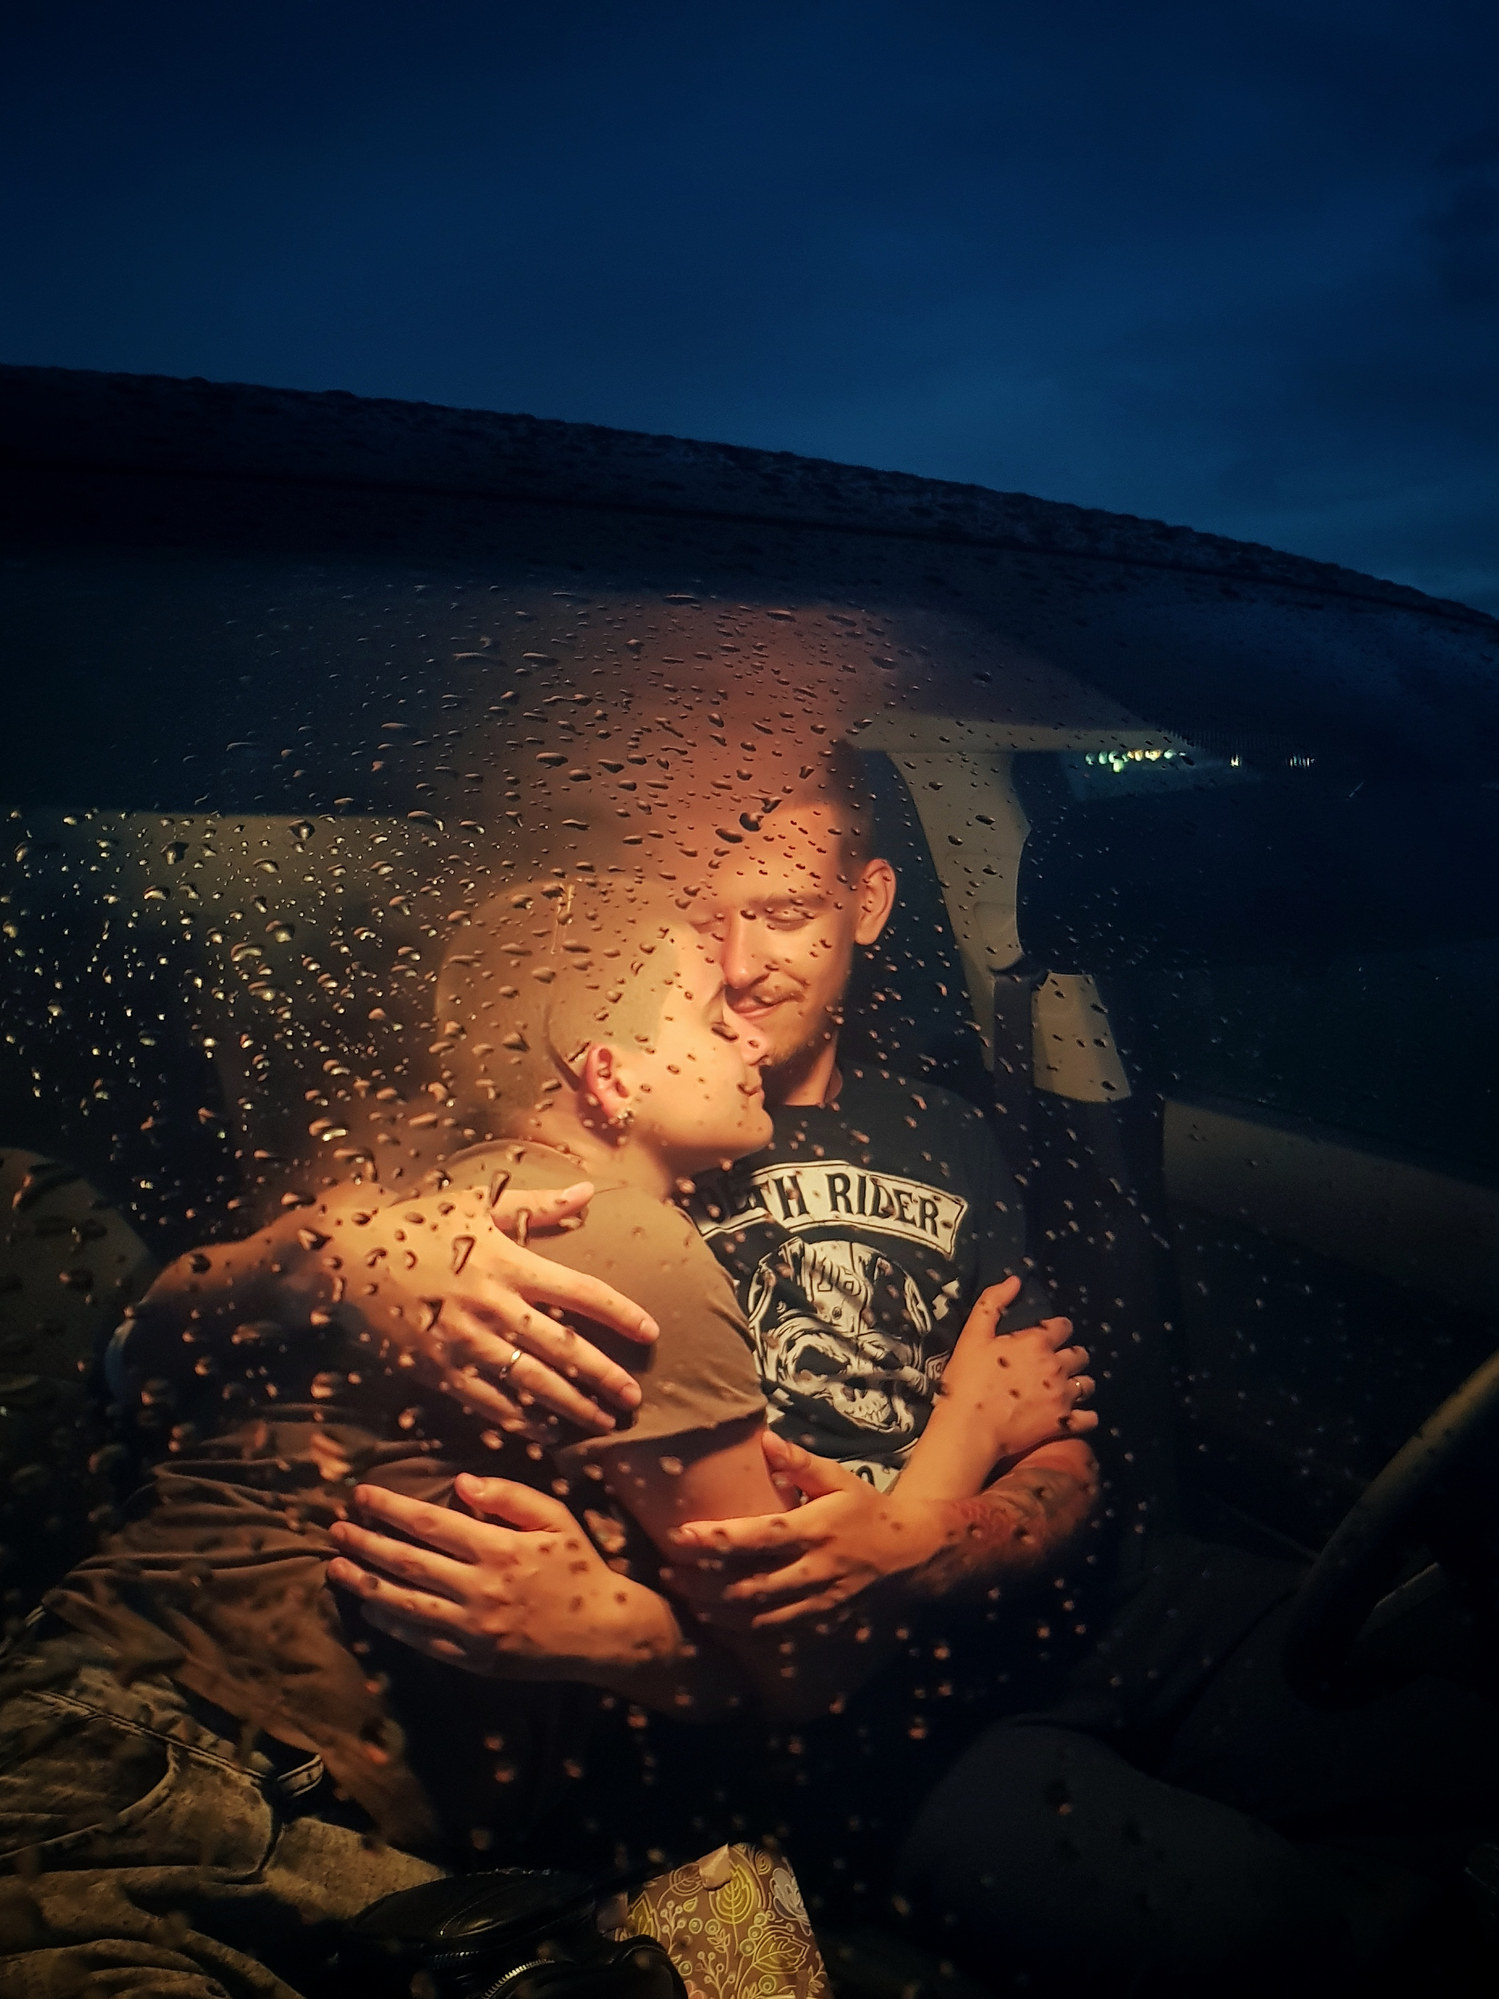 two people cozy up in a car while it rains outside